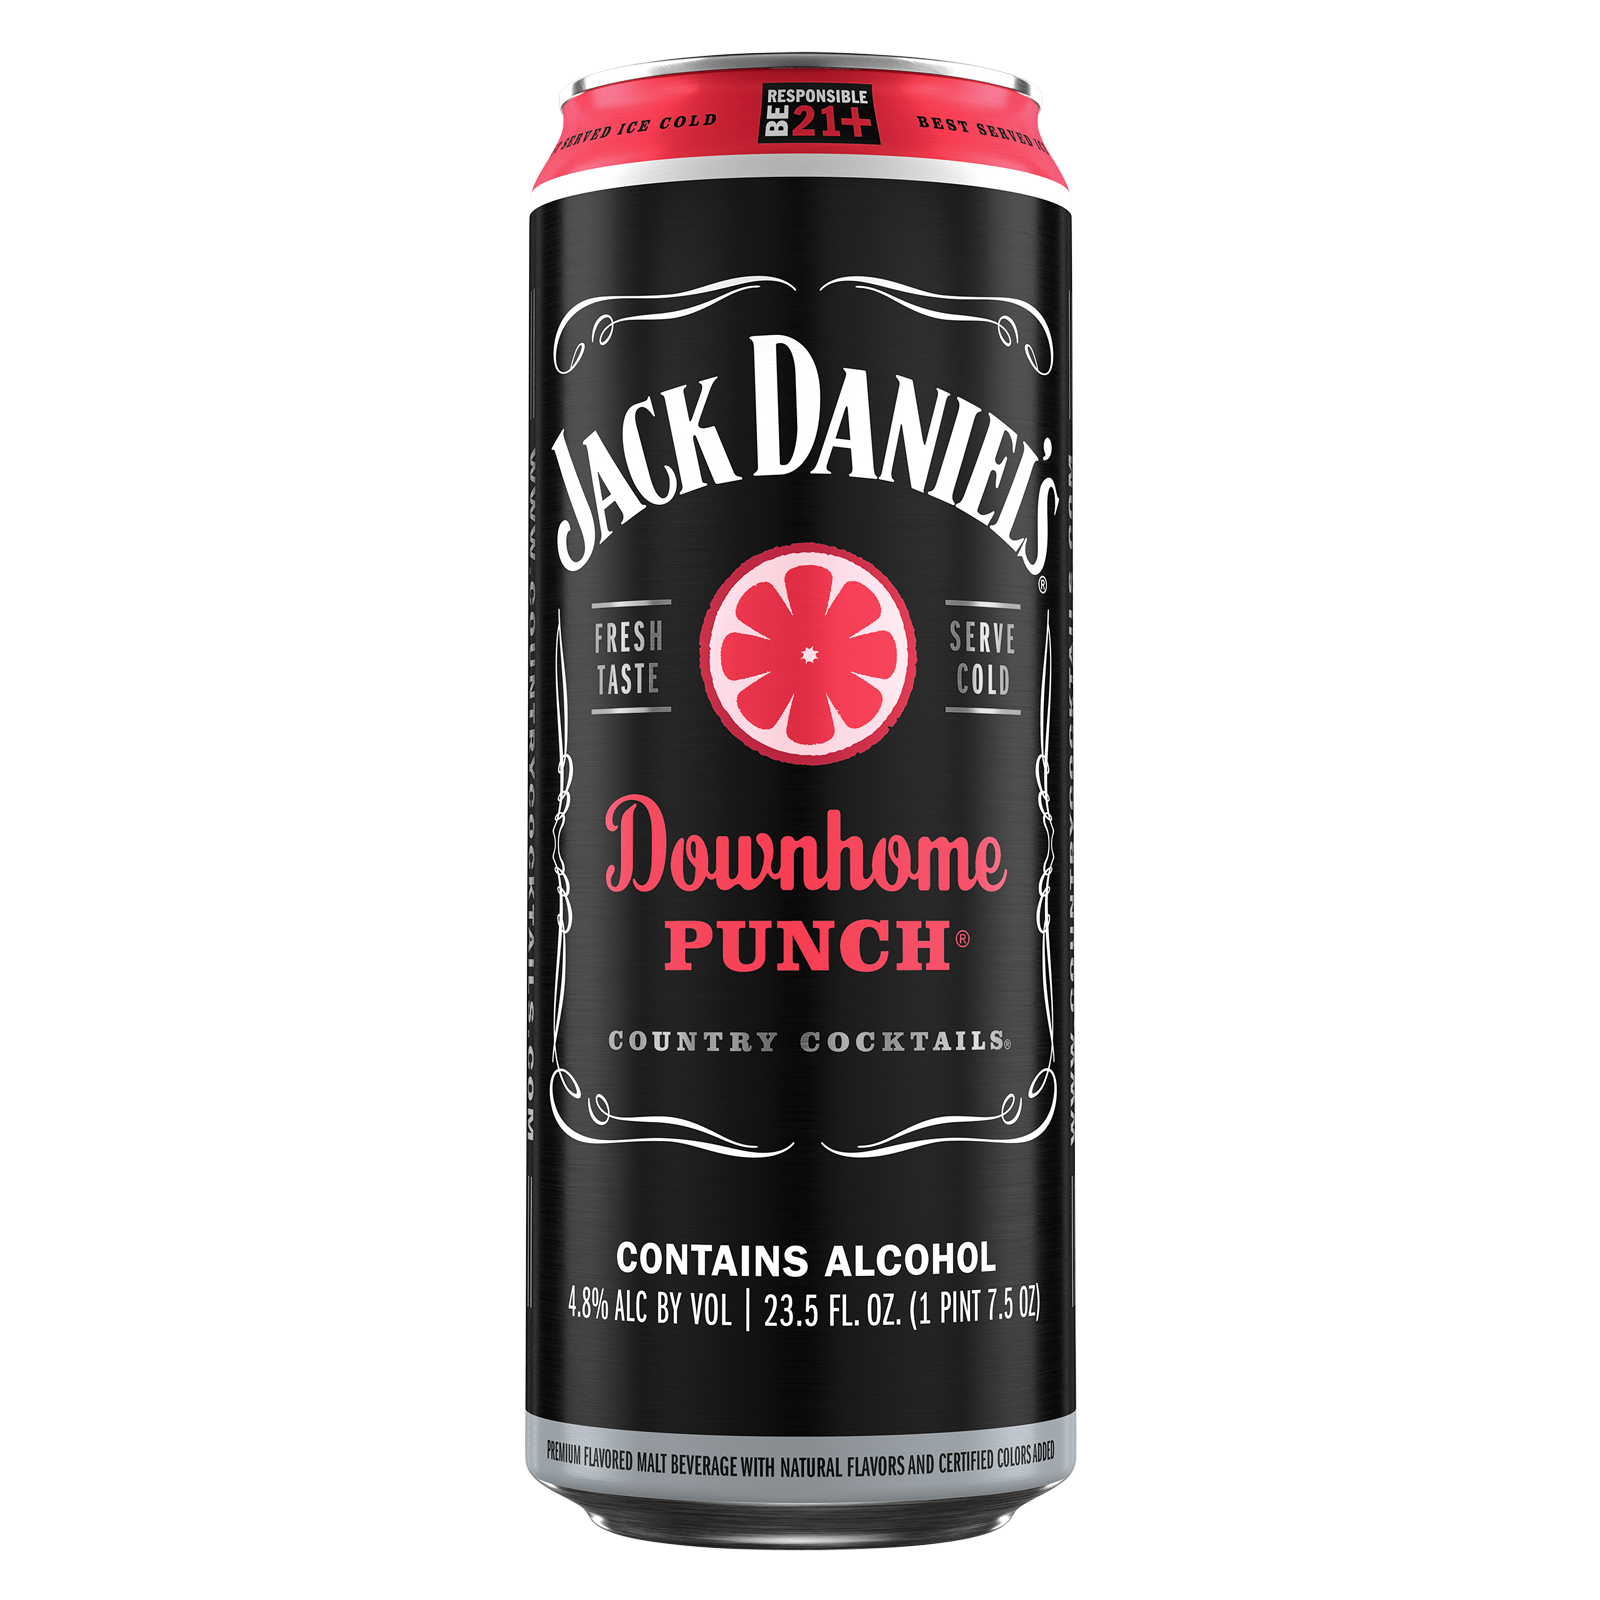 Jack Daniel's Country Cocktails Downhome Punch Single 23.5oz Can 4.8% ABV